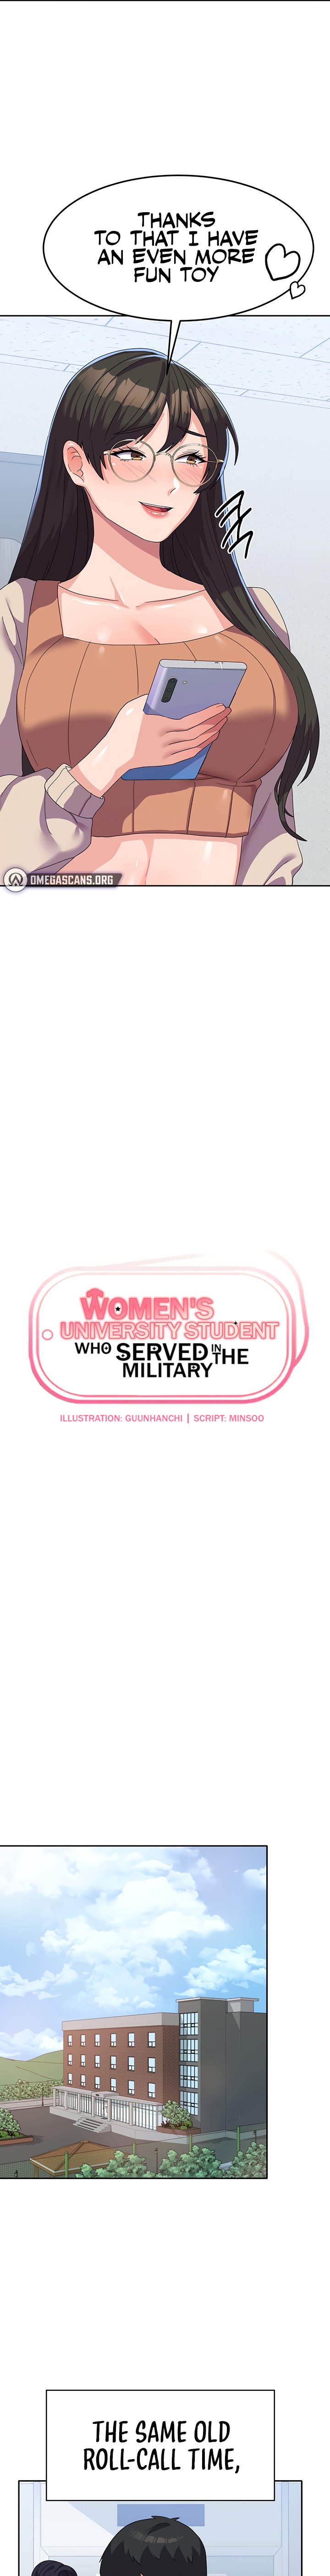 Women’s University Student who Served in the Military - Chapter 17 Page 5